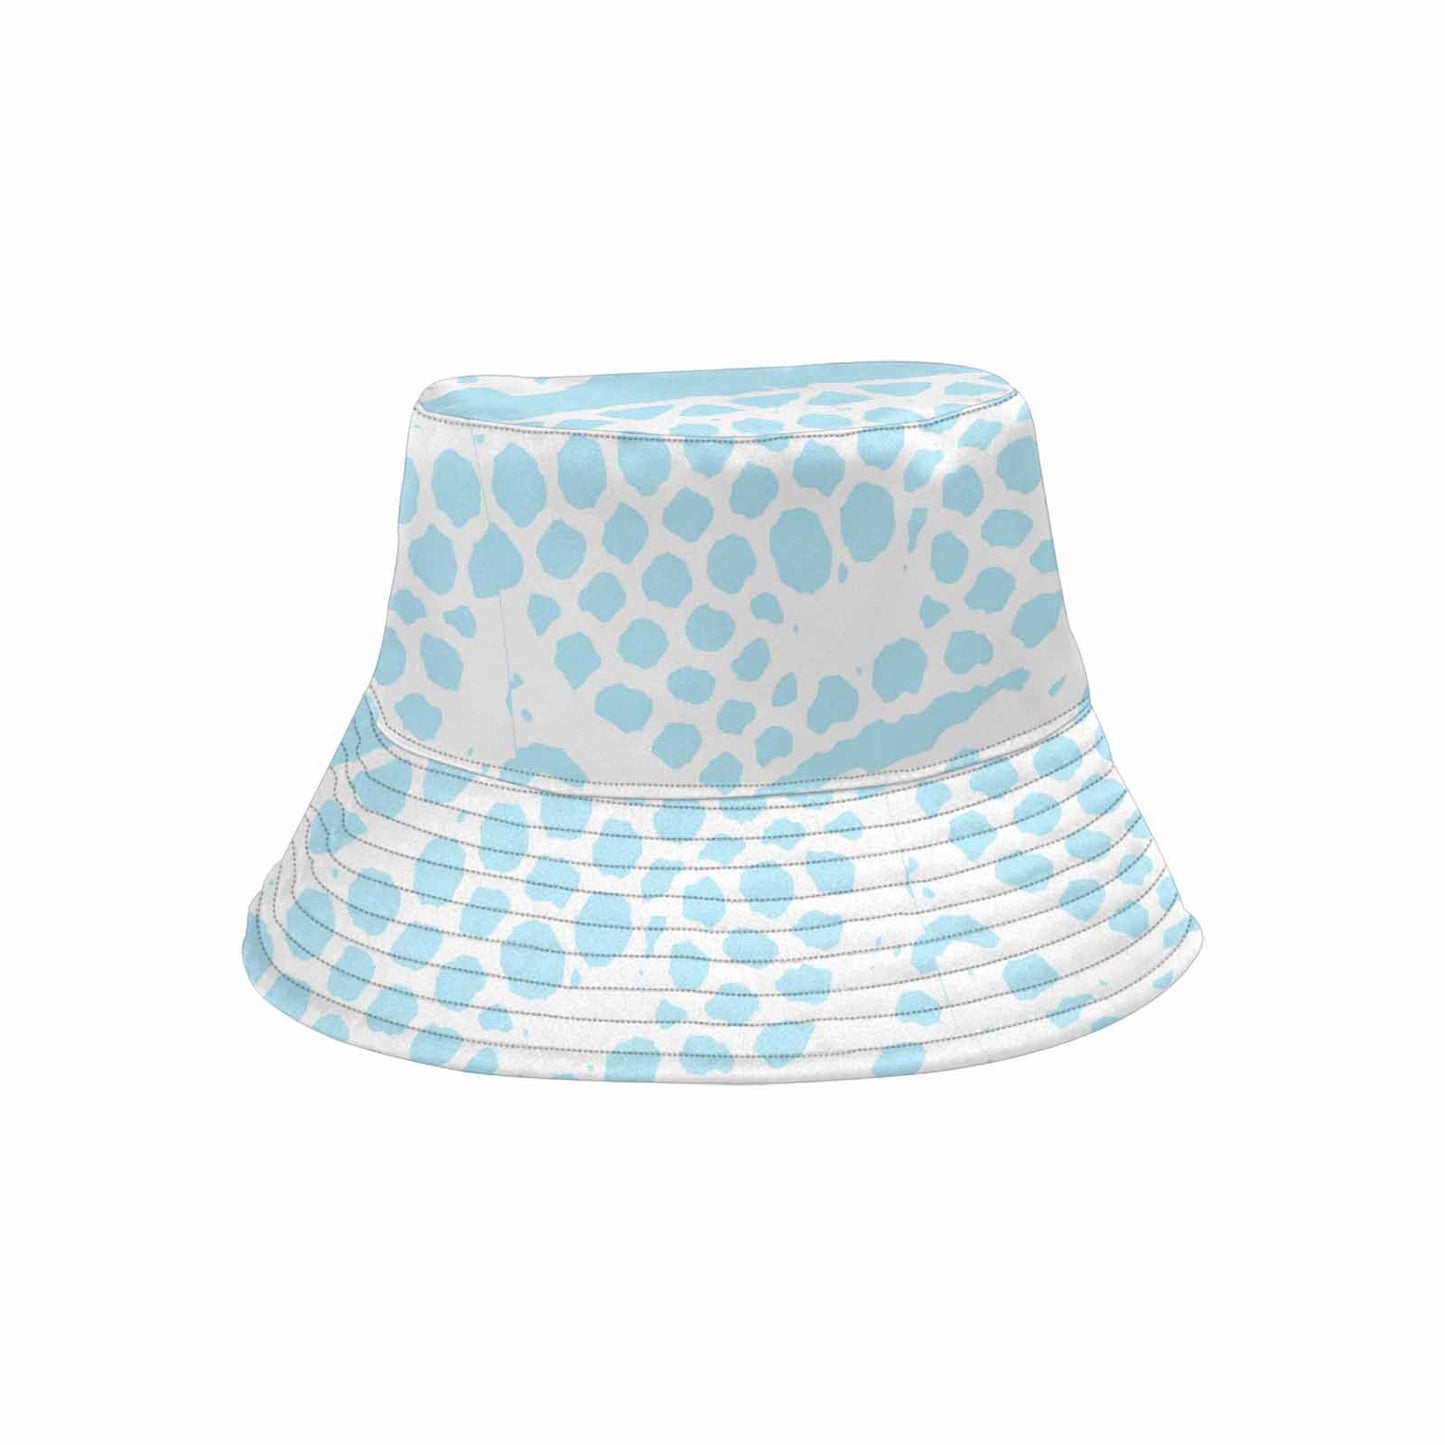 Victorian lace Bucket Hat, outdoors hat, design 08